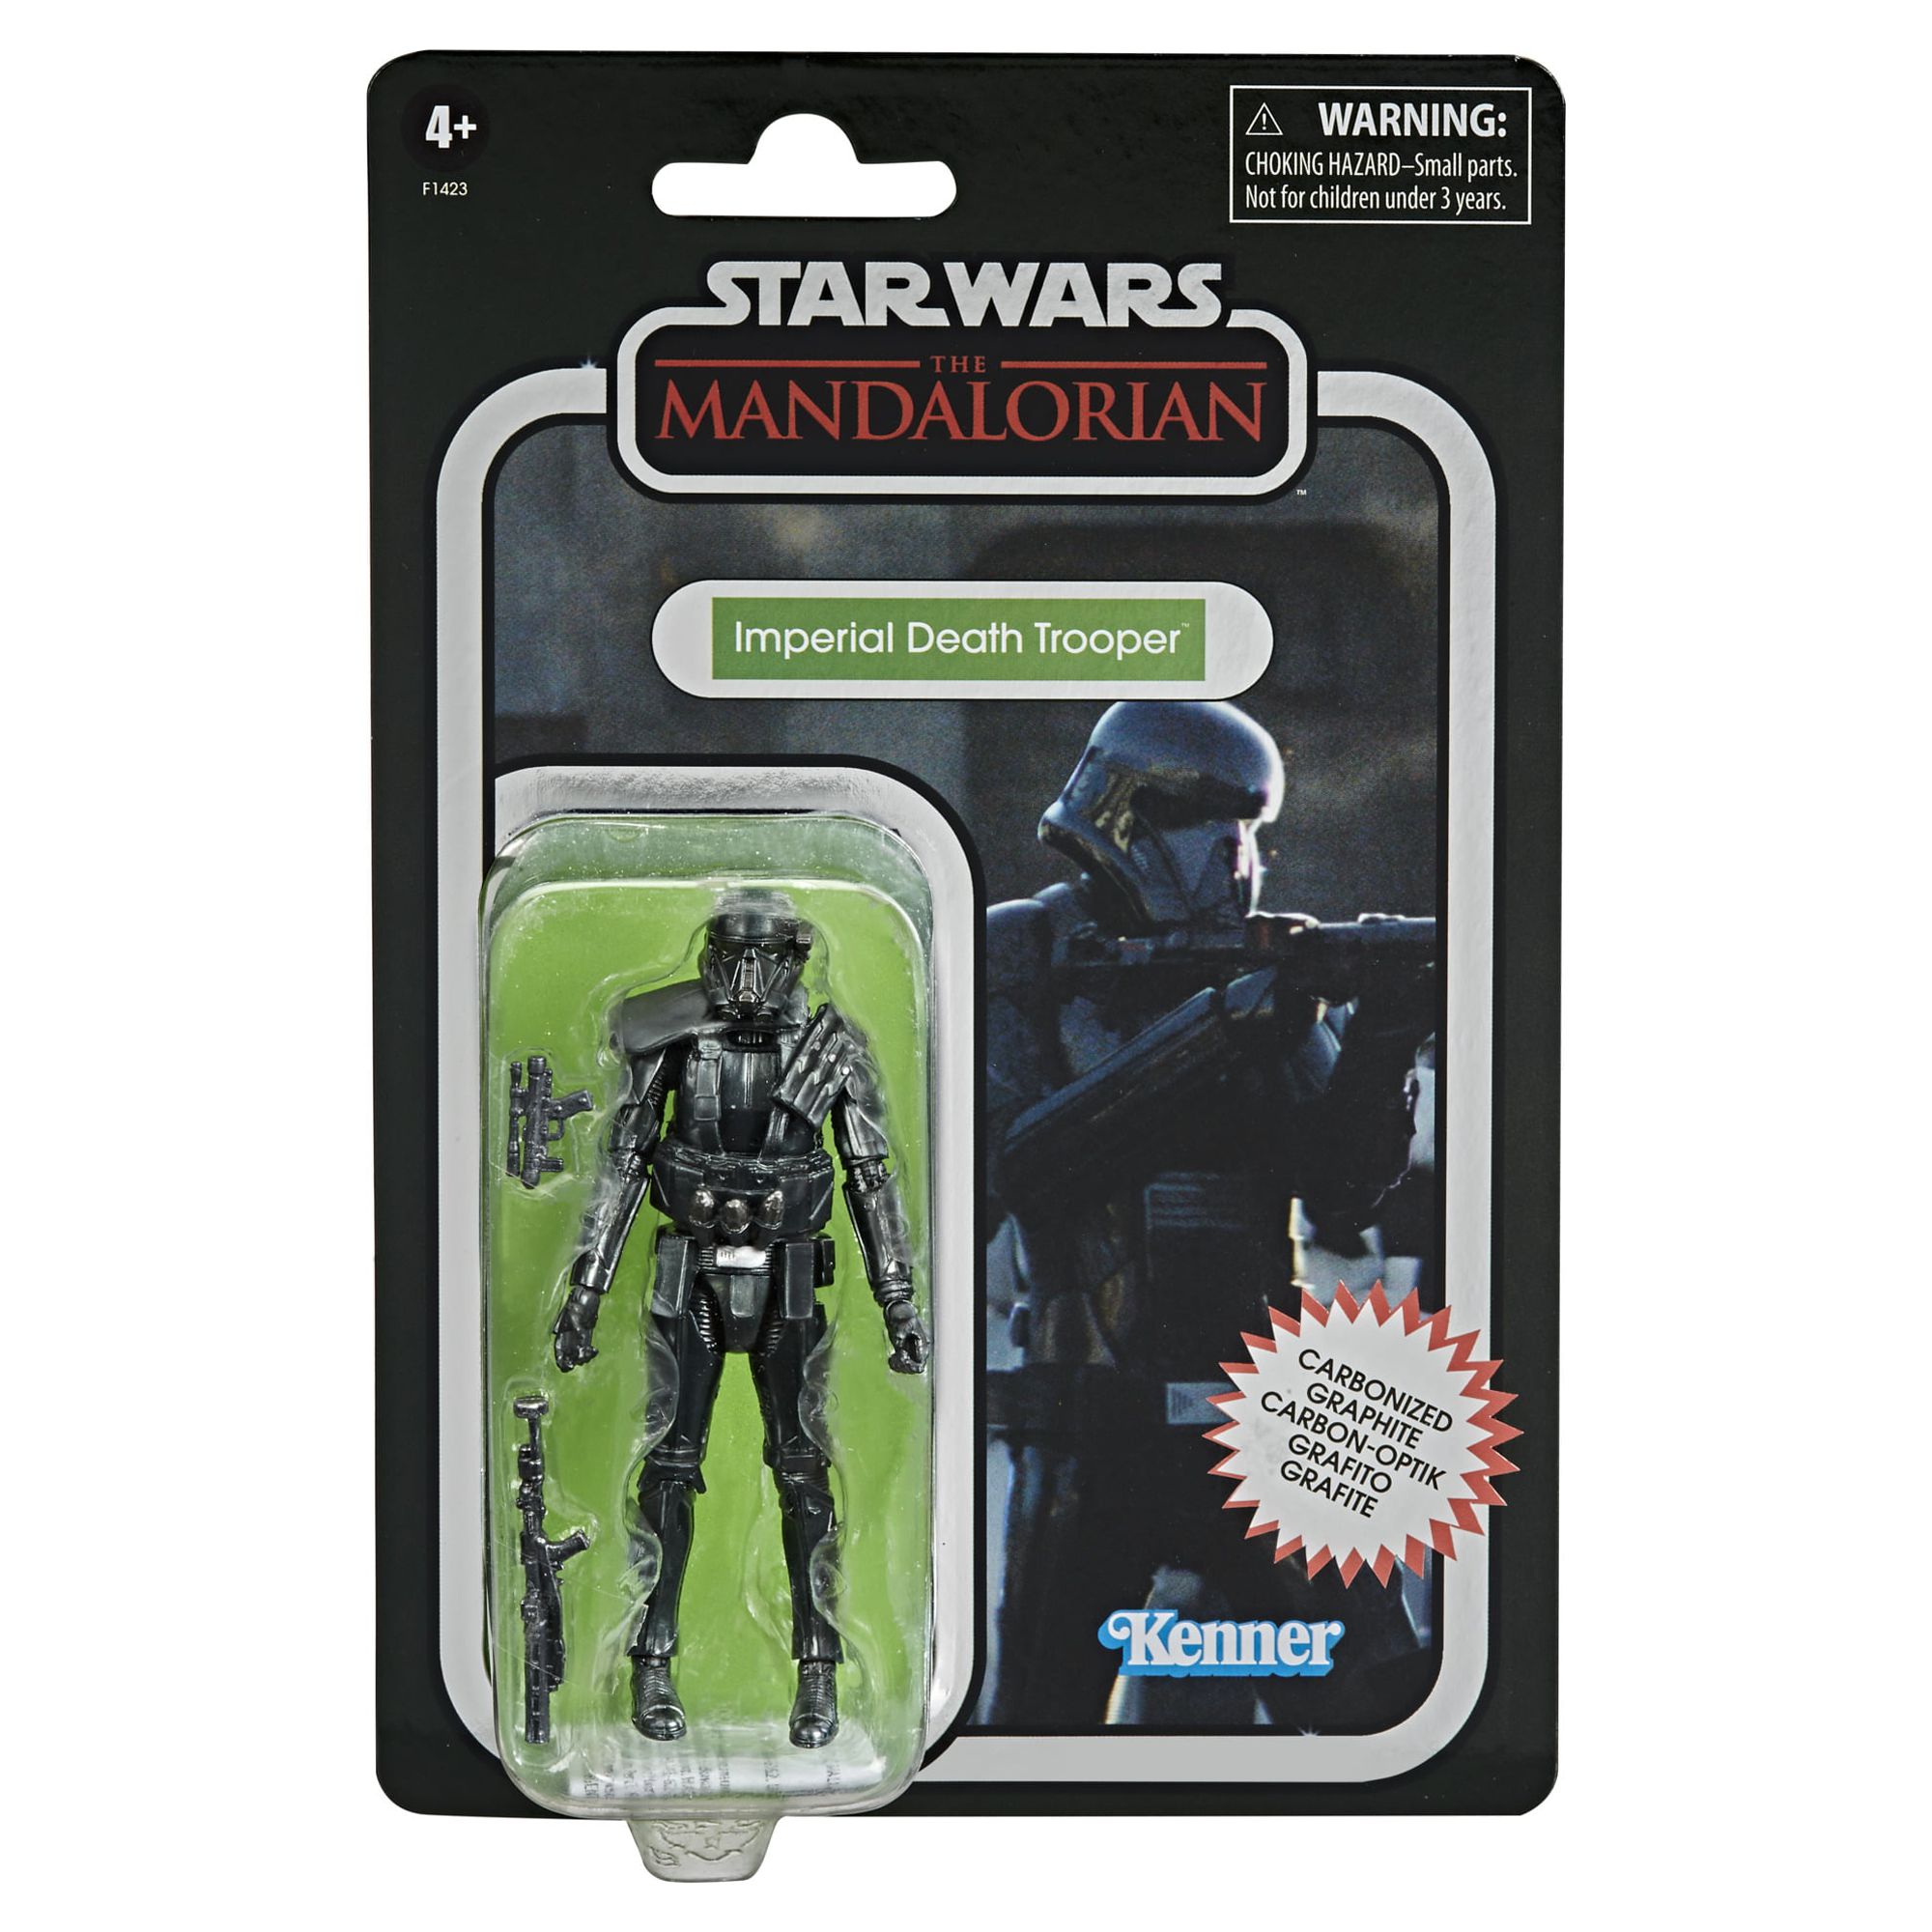 Star Wars: The Mandalorian The Vintage Collection Imperial Death Trooper Kids Toy Action Figure for Boys and Girls Ages 4 5 6 7 8 and Up (3.75”) - image 2 of 8